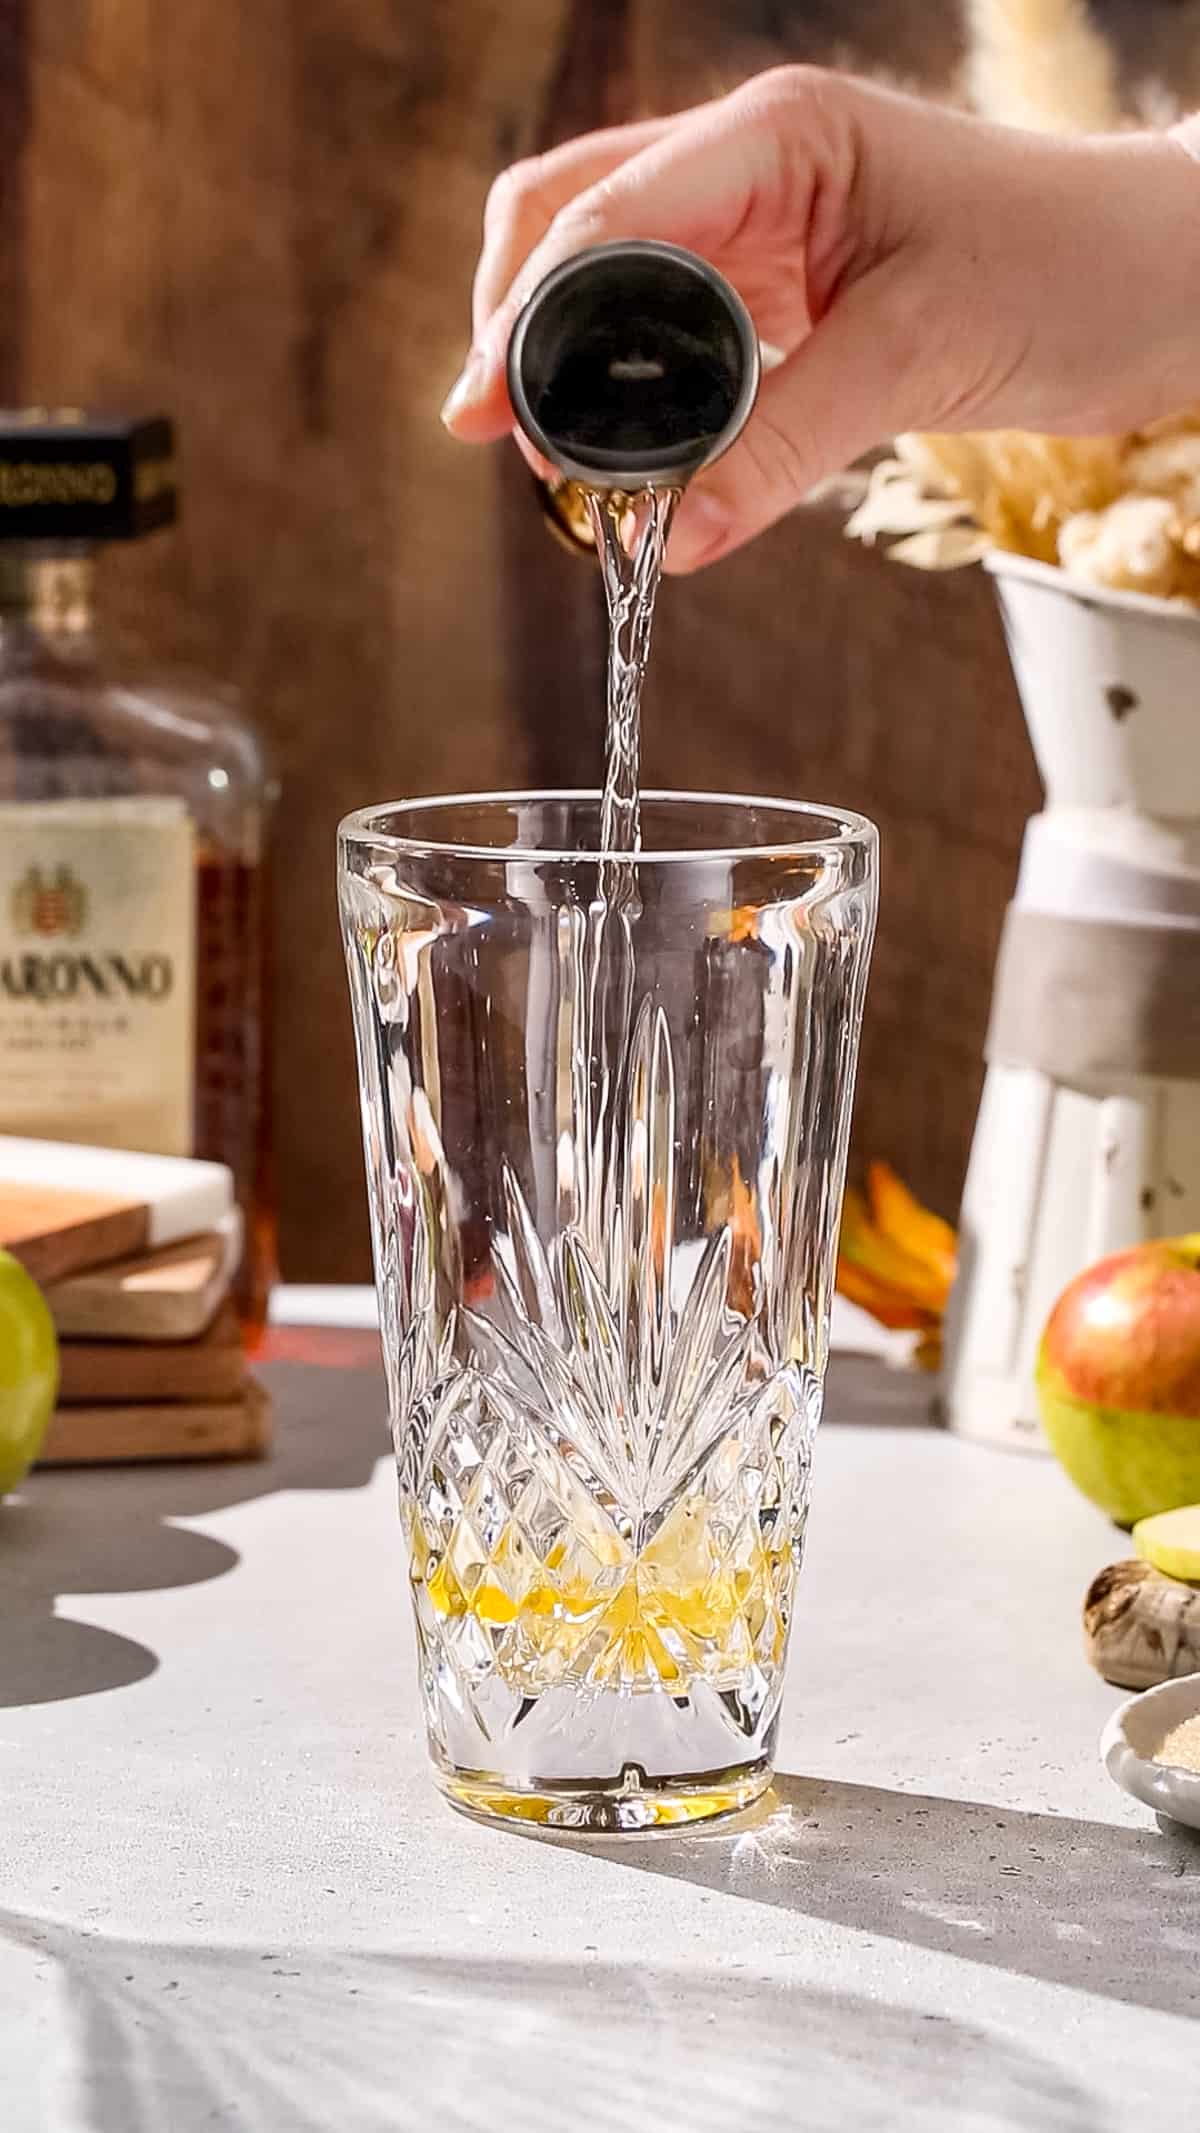 Hand pouring vodka into a cocktail shaker.